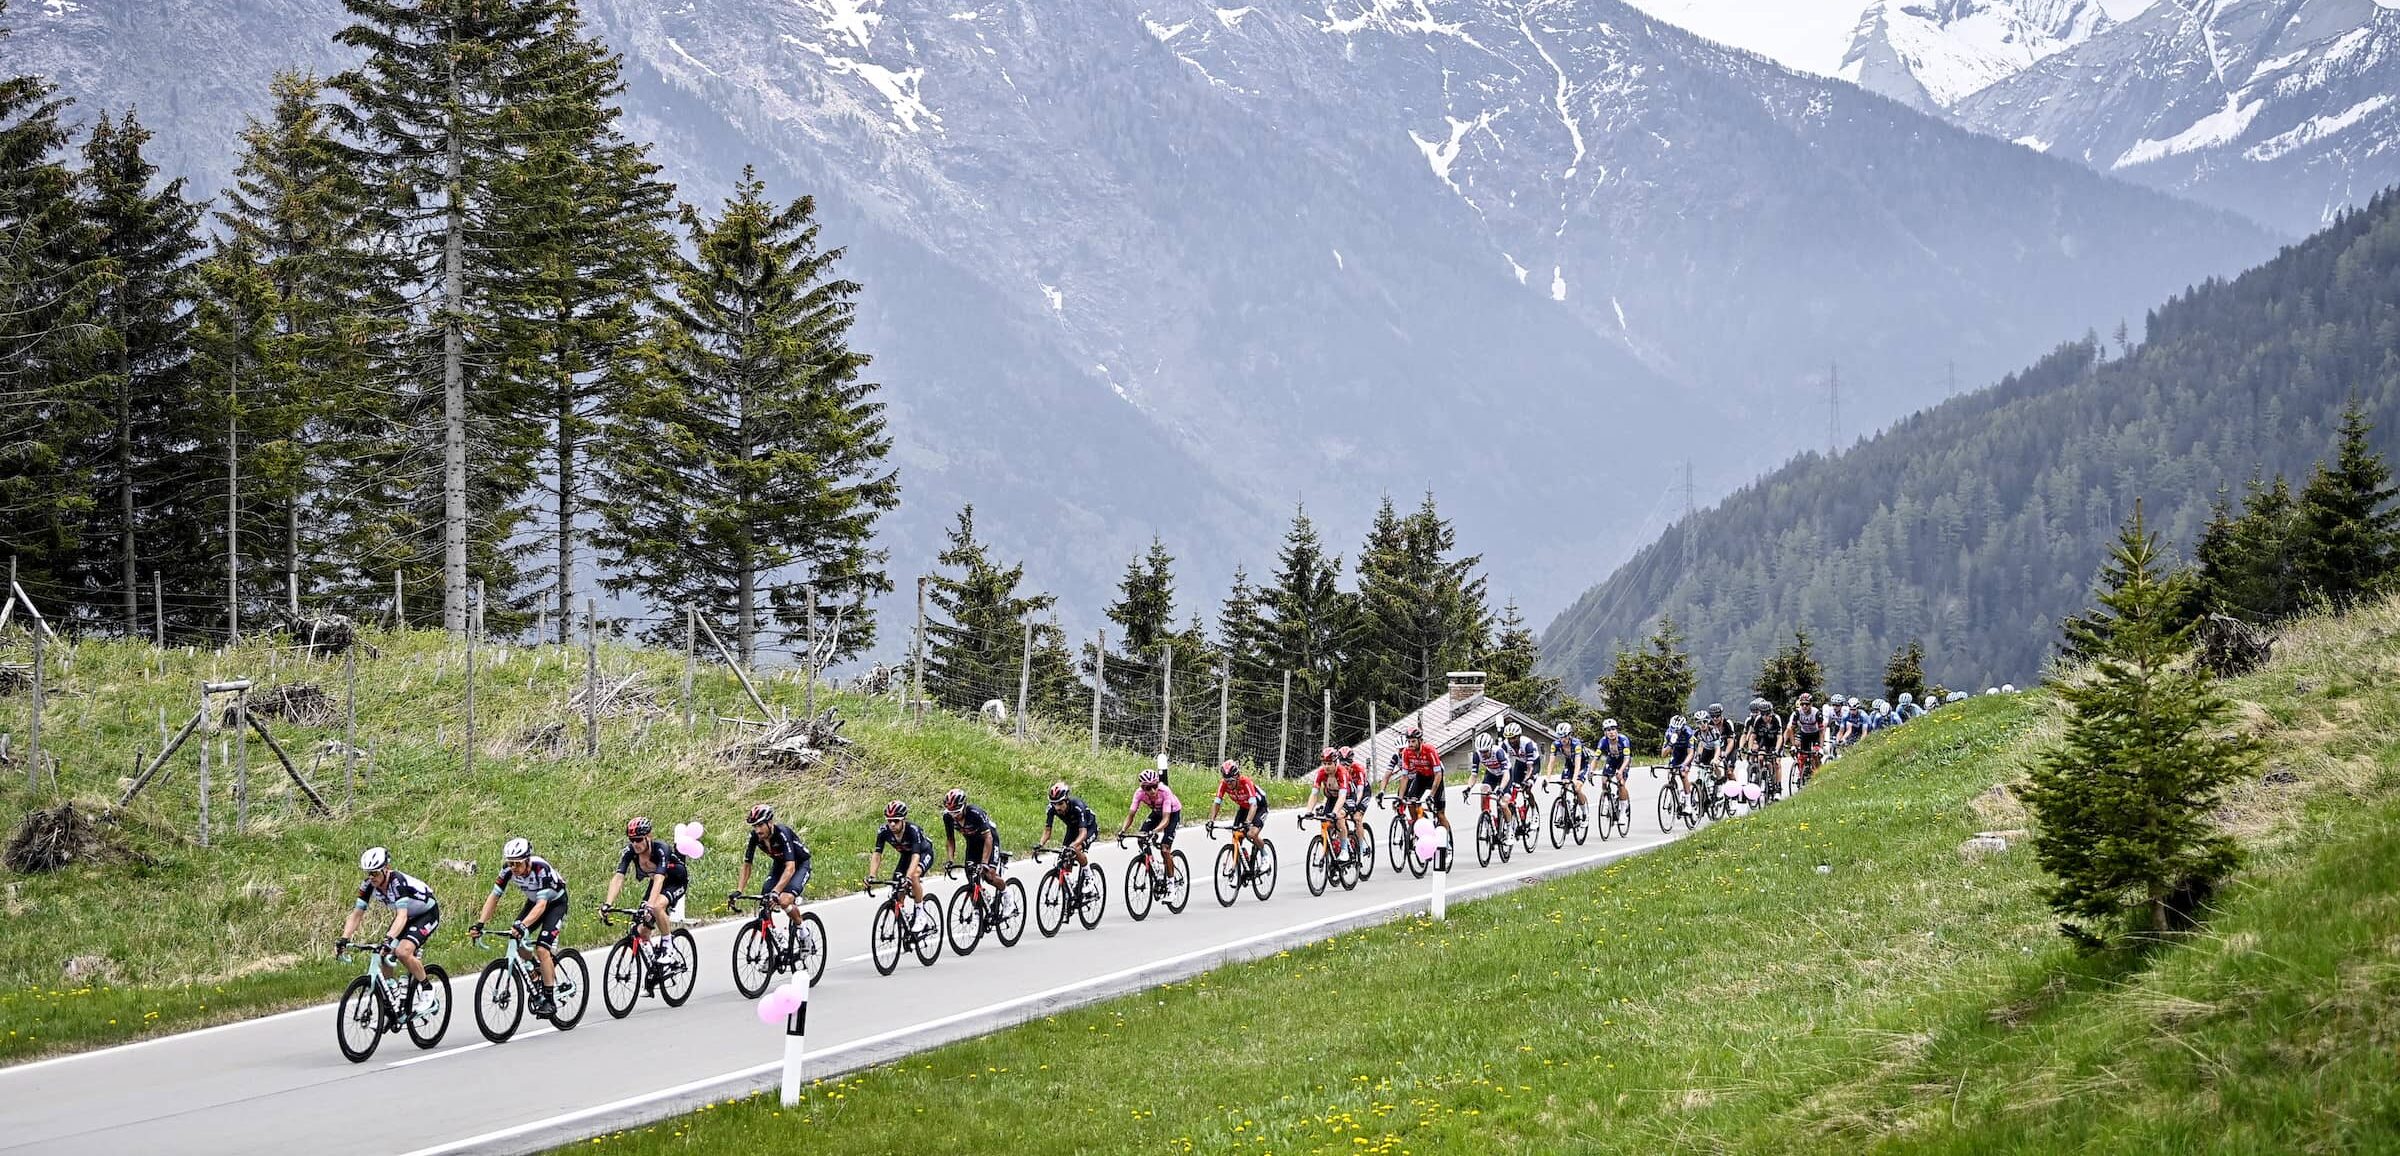 Cyclists ride through the alps